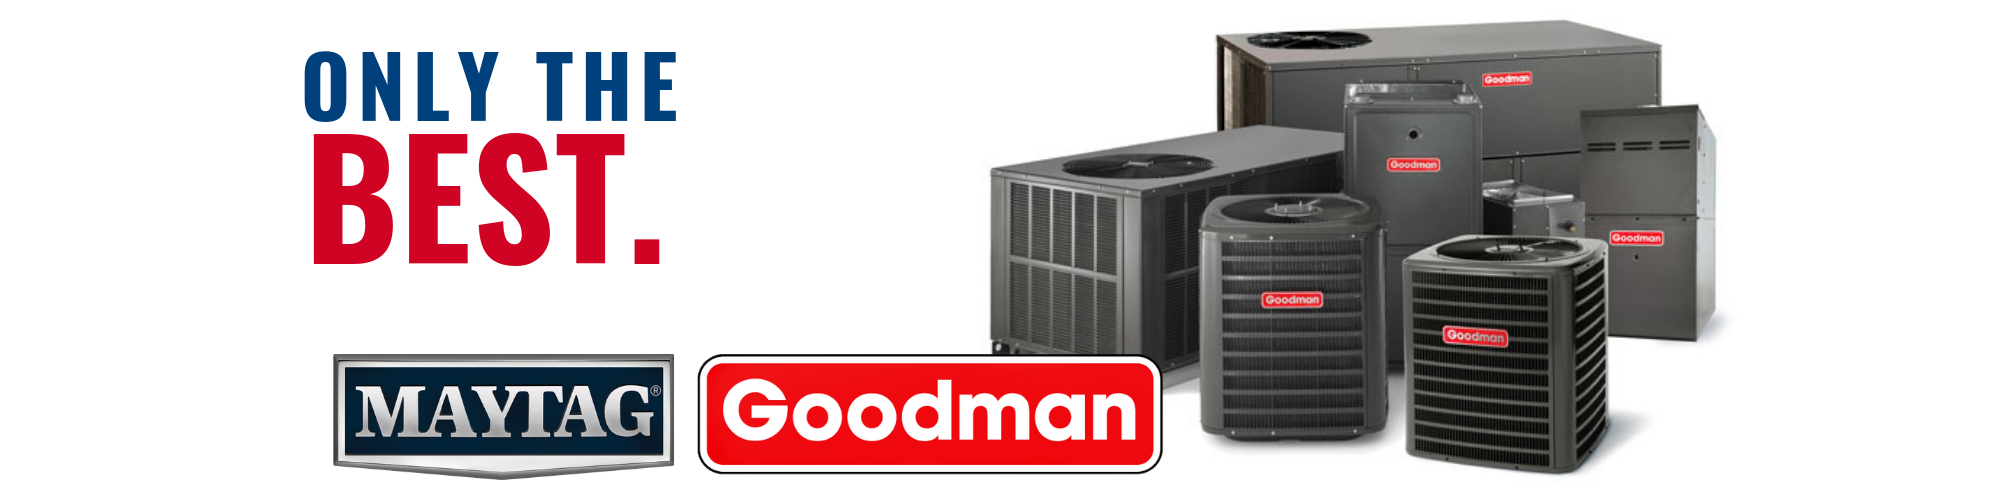 Only The Best HVAC Brands goodman and maytag 